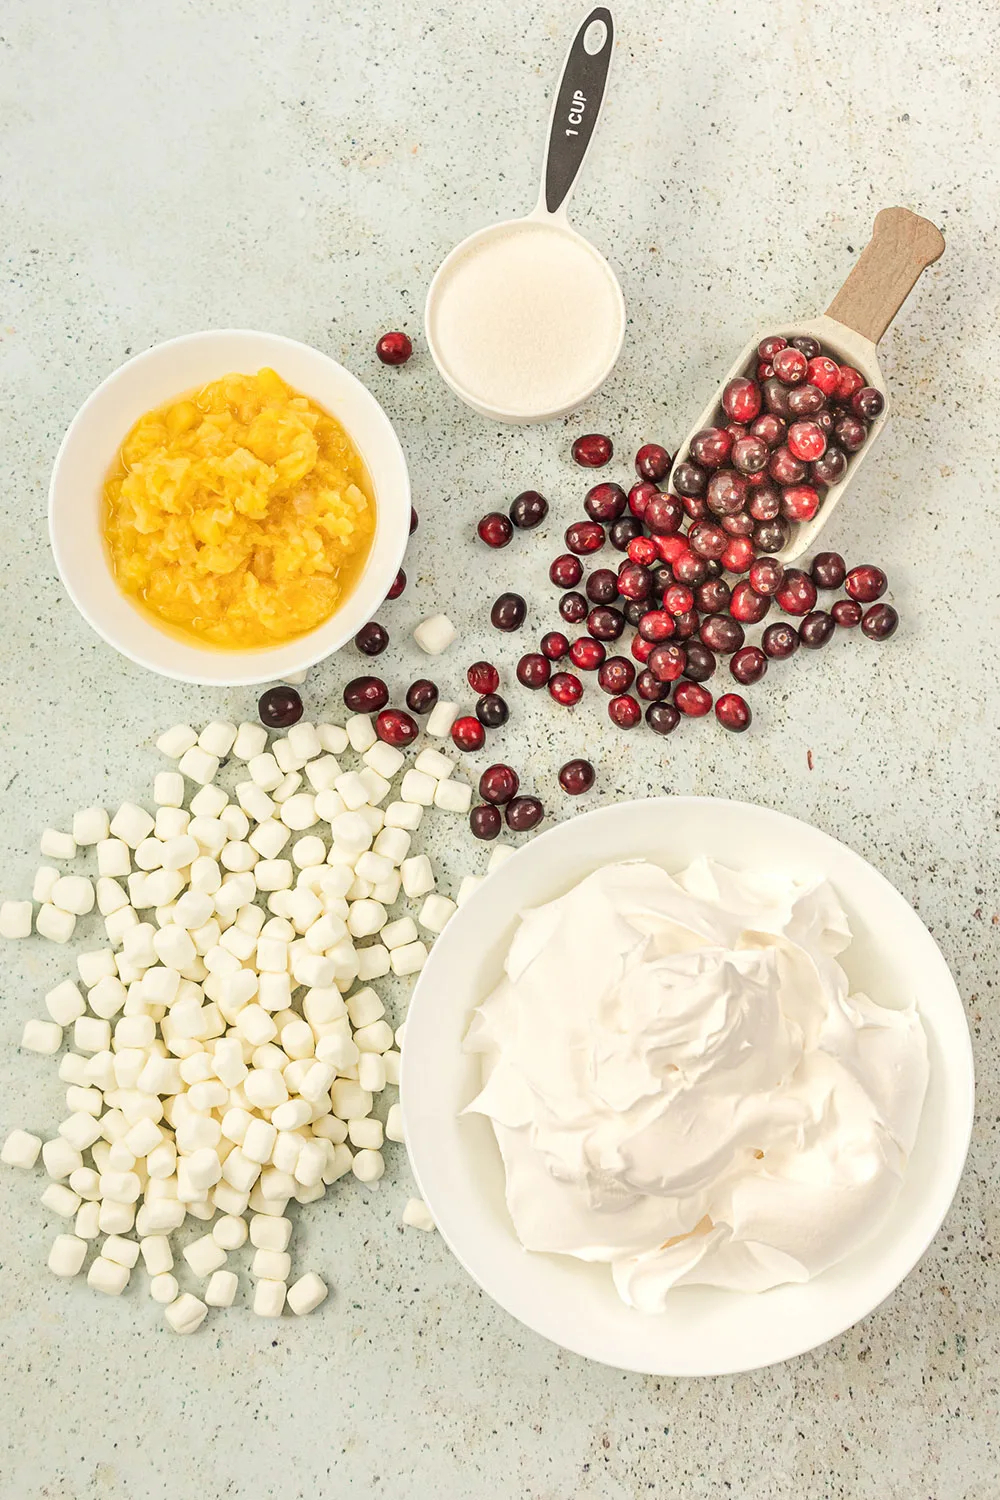 Cranberries, marshmallows, and other ingredients to make a fluffy salad. 